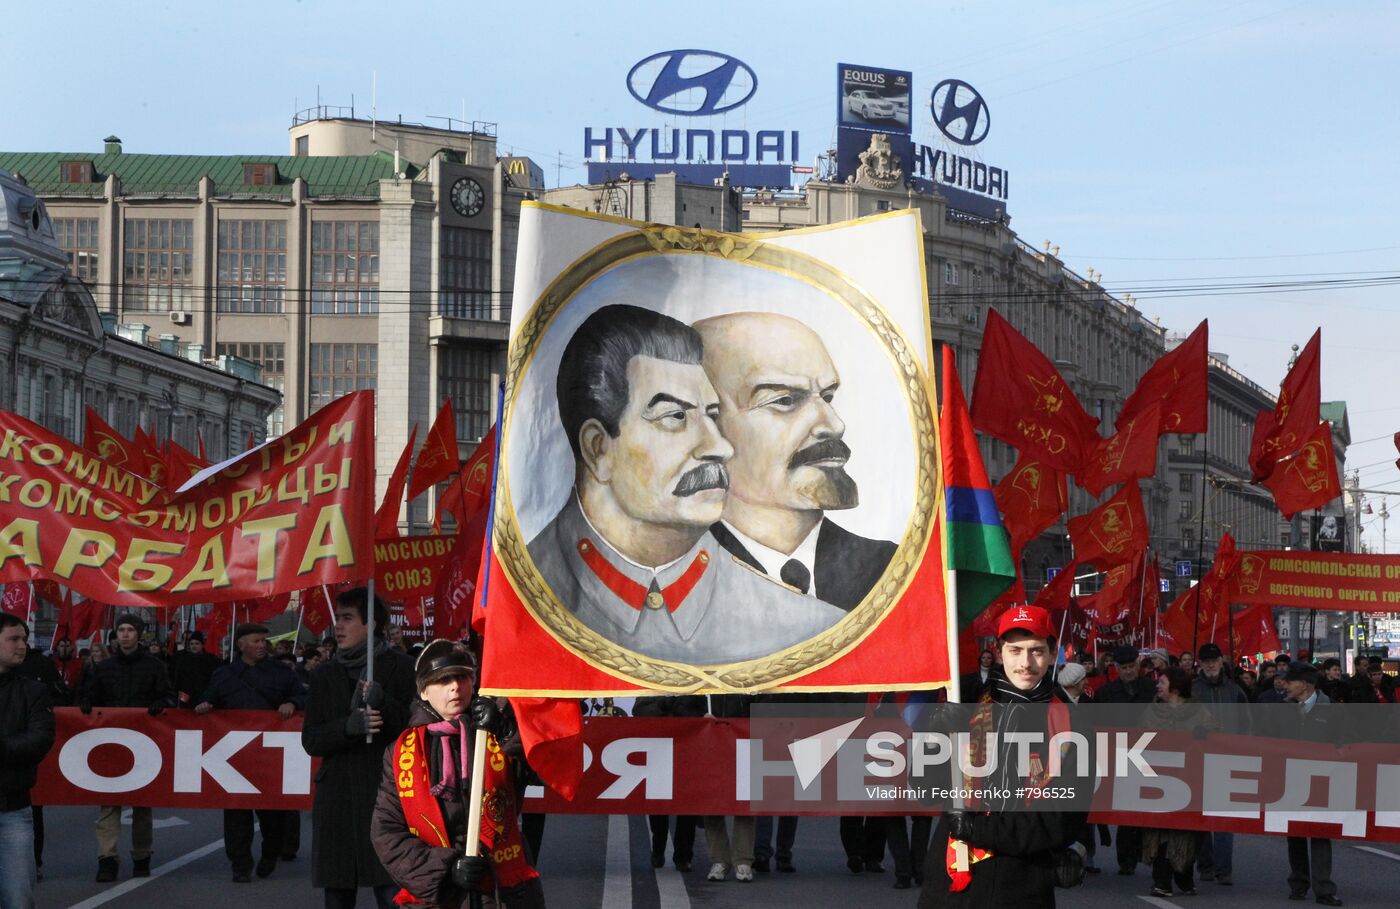 Communists march in Moscow on October Revolution day